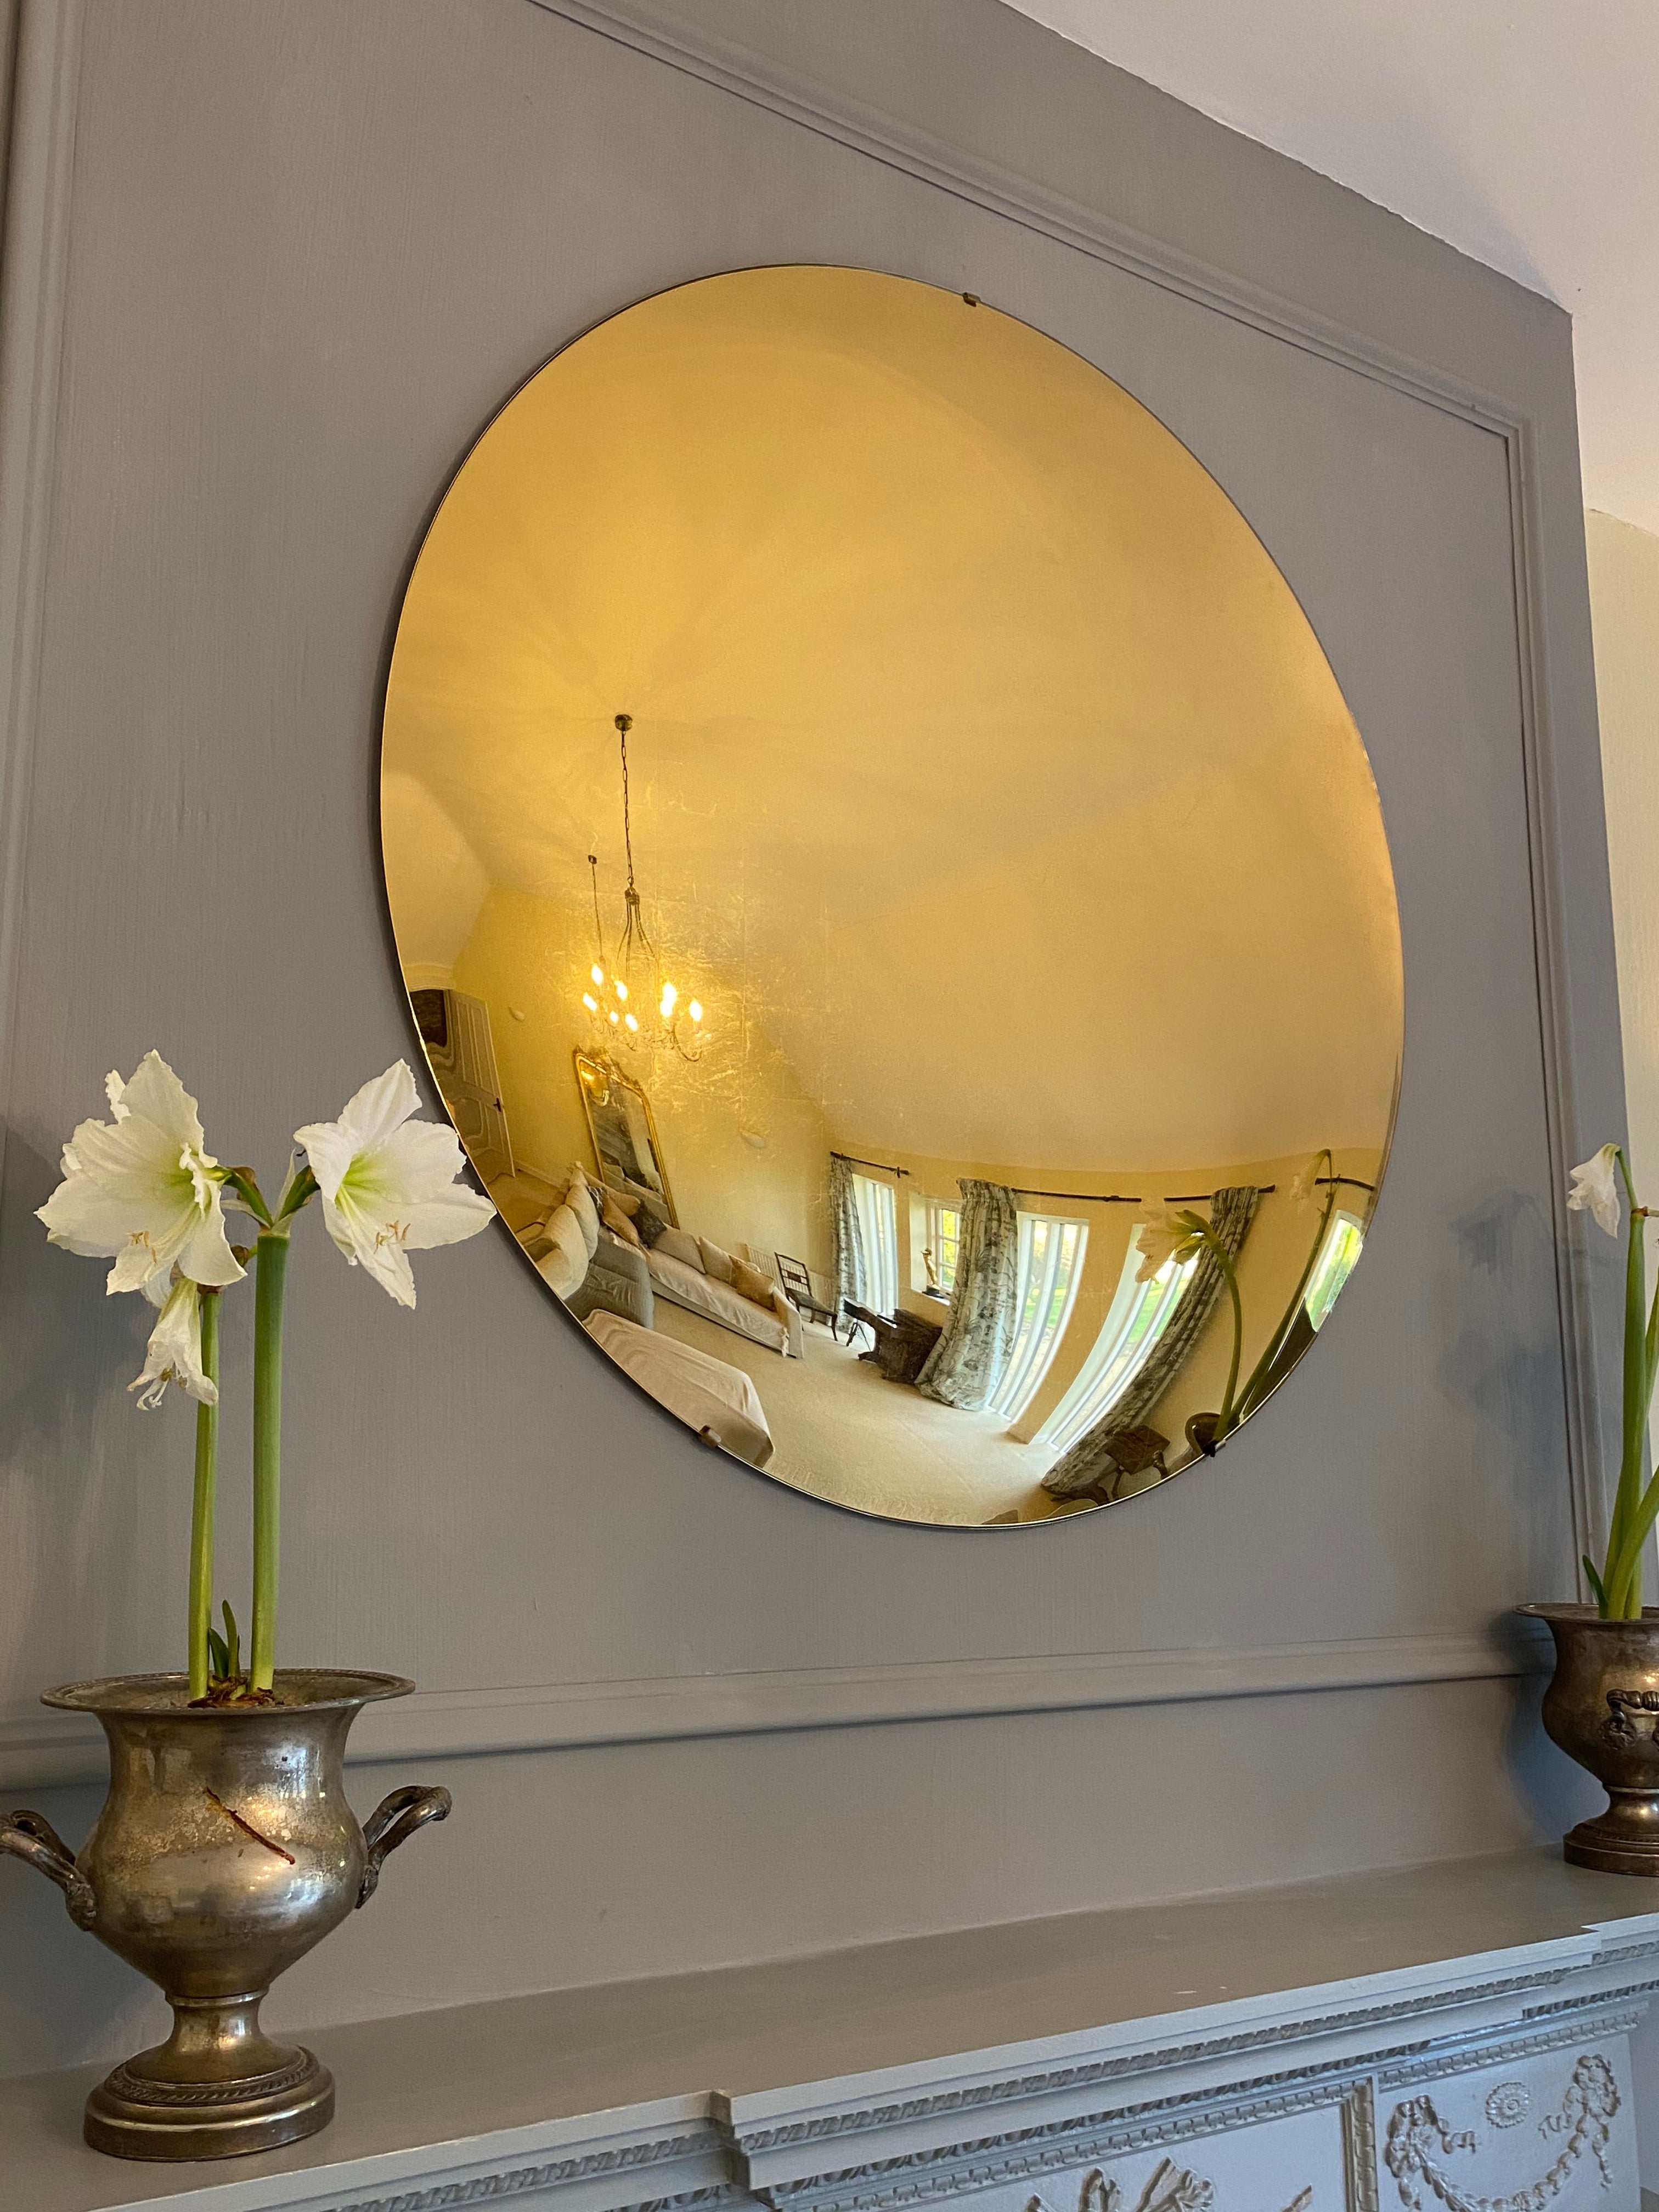 The Varenna glass convex wall mirror is fabricated from 6mm low iron glass for extra clarity. Verre églomisé is from the French term meaning glass gilded, is a process in which the back side of glass is gilded with gold or metal leaf. In one of a